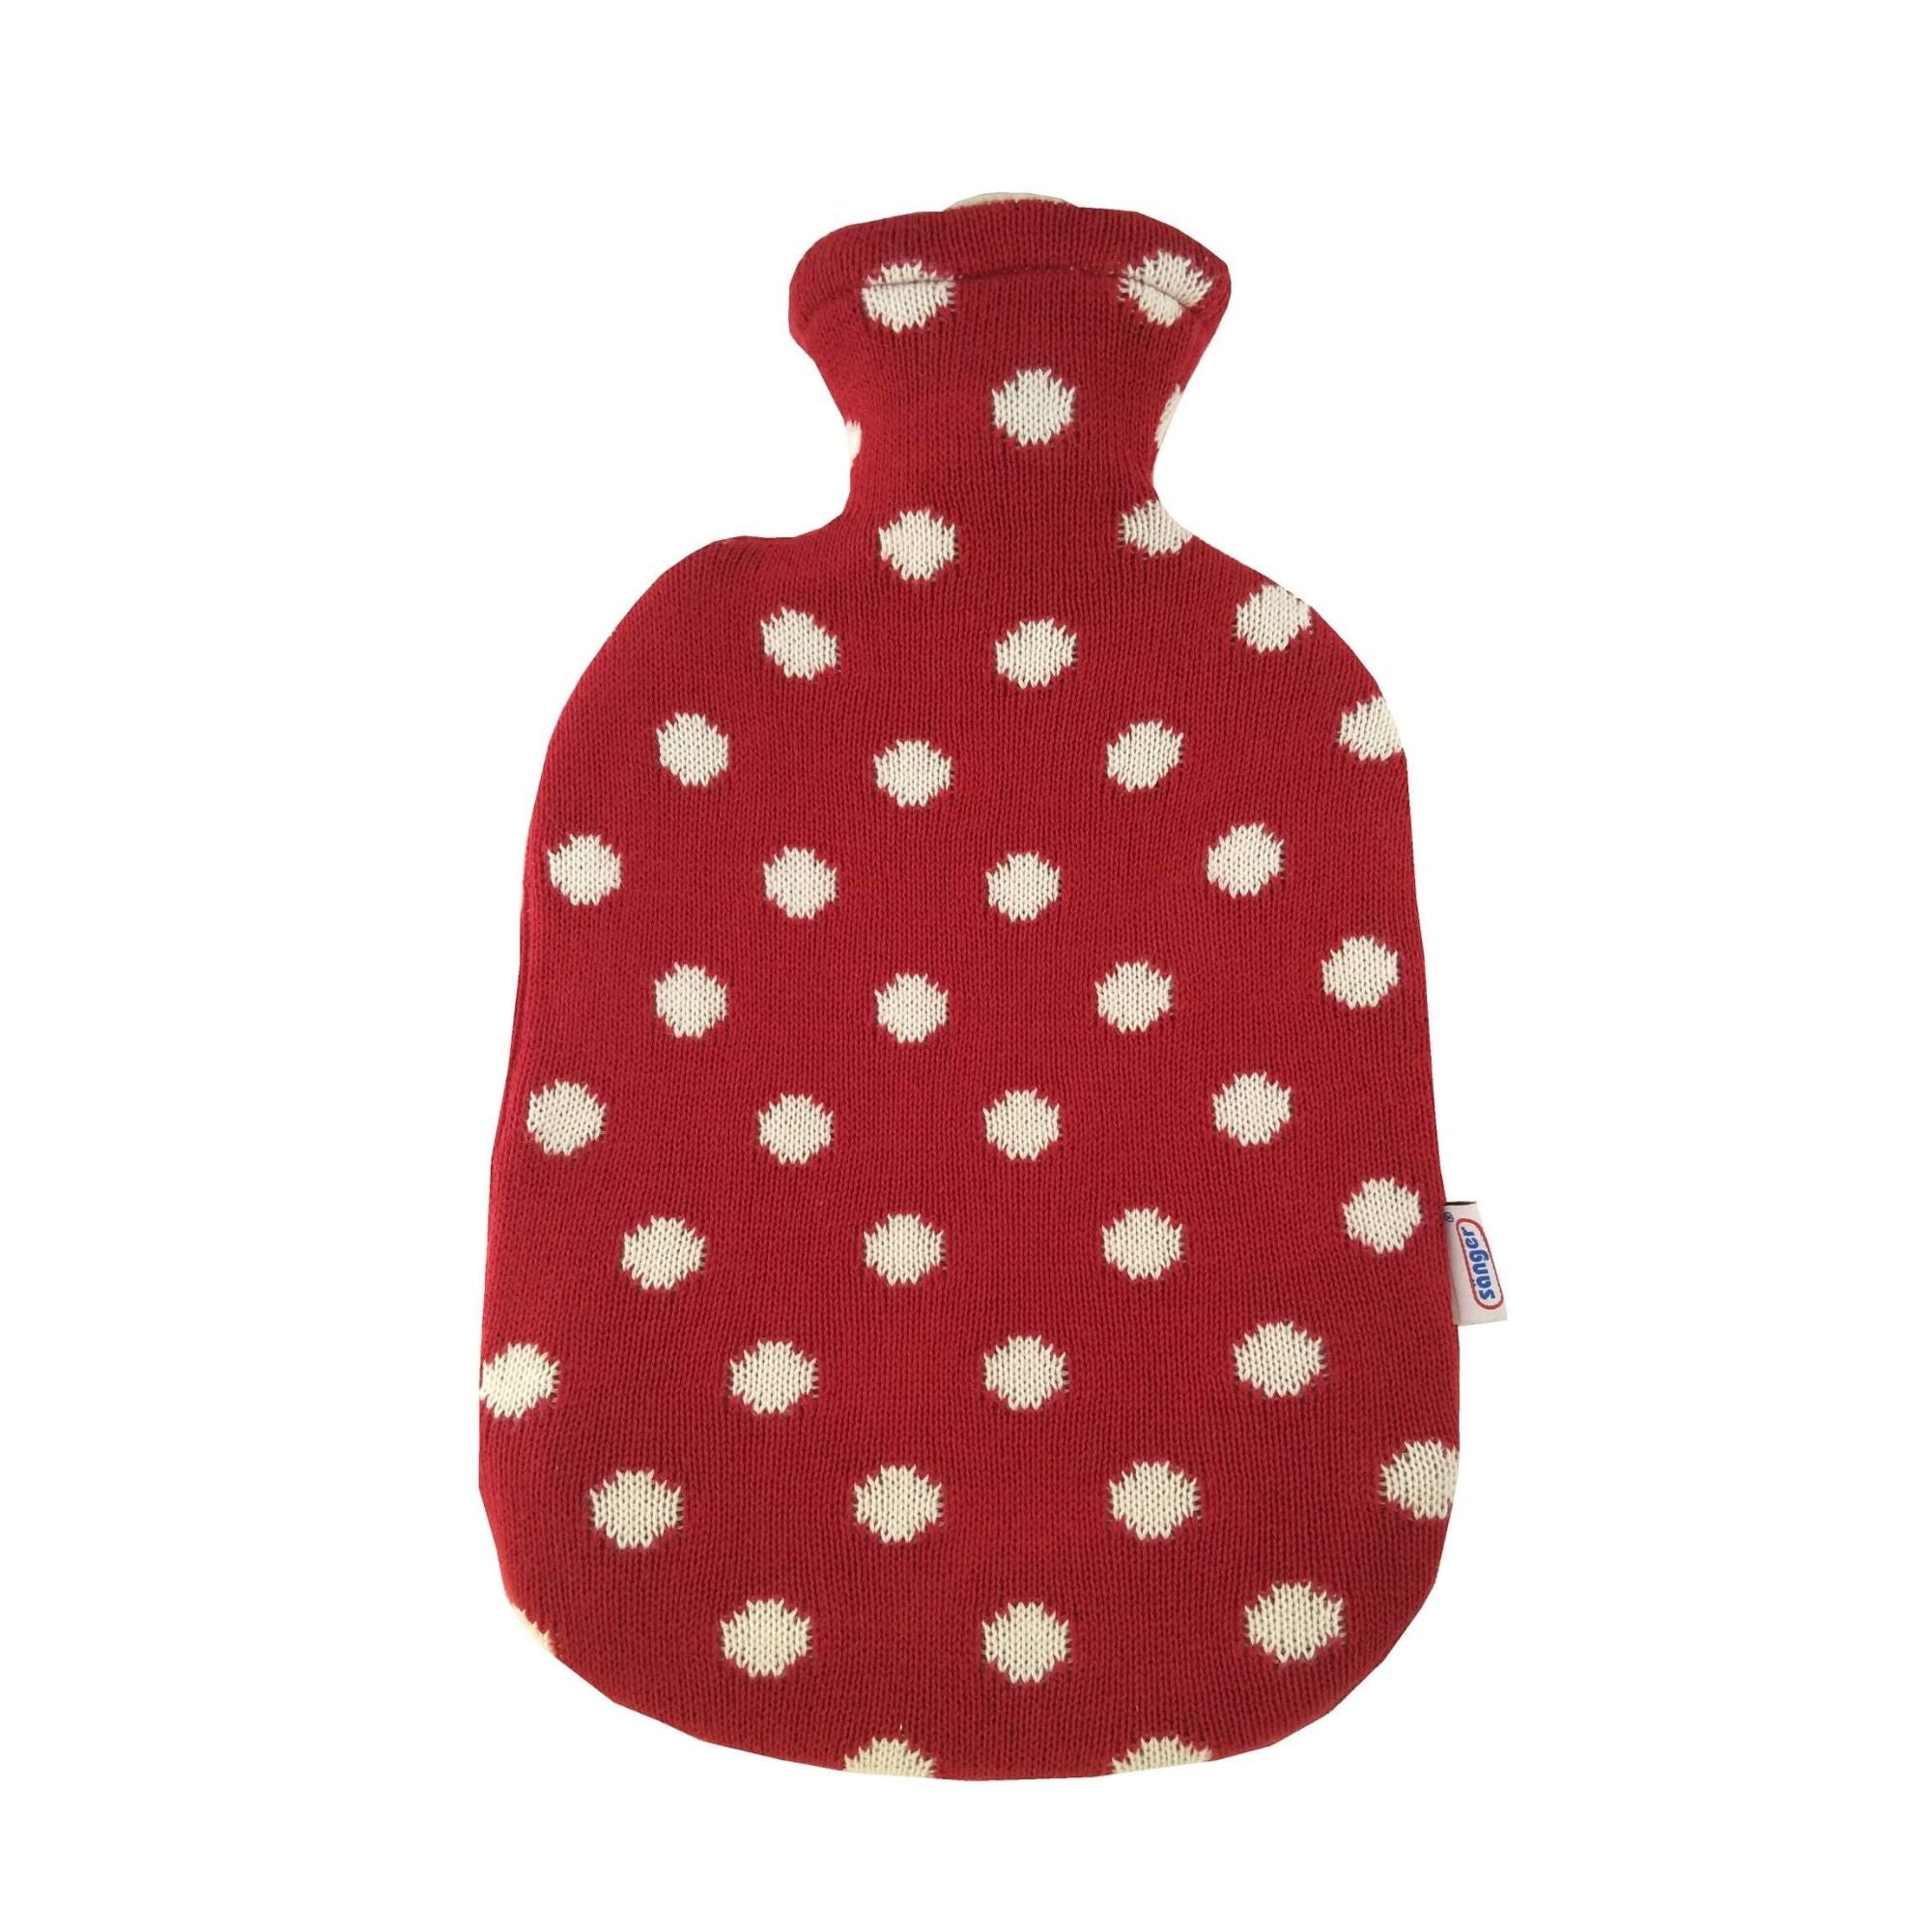 2 Litre Sanger Hot Water Bottle with Knitted Red Polka Dot Cotton Cover